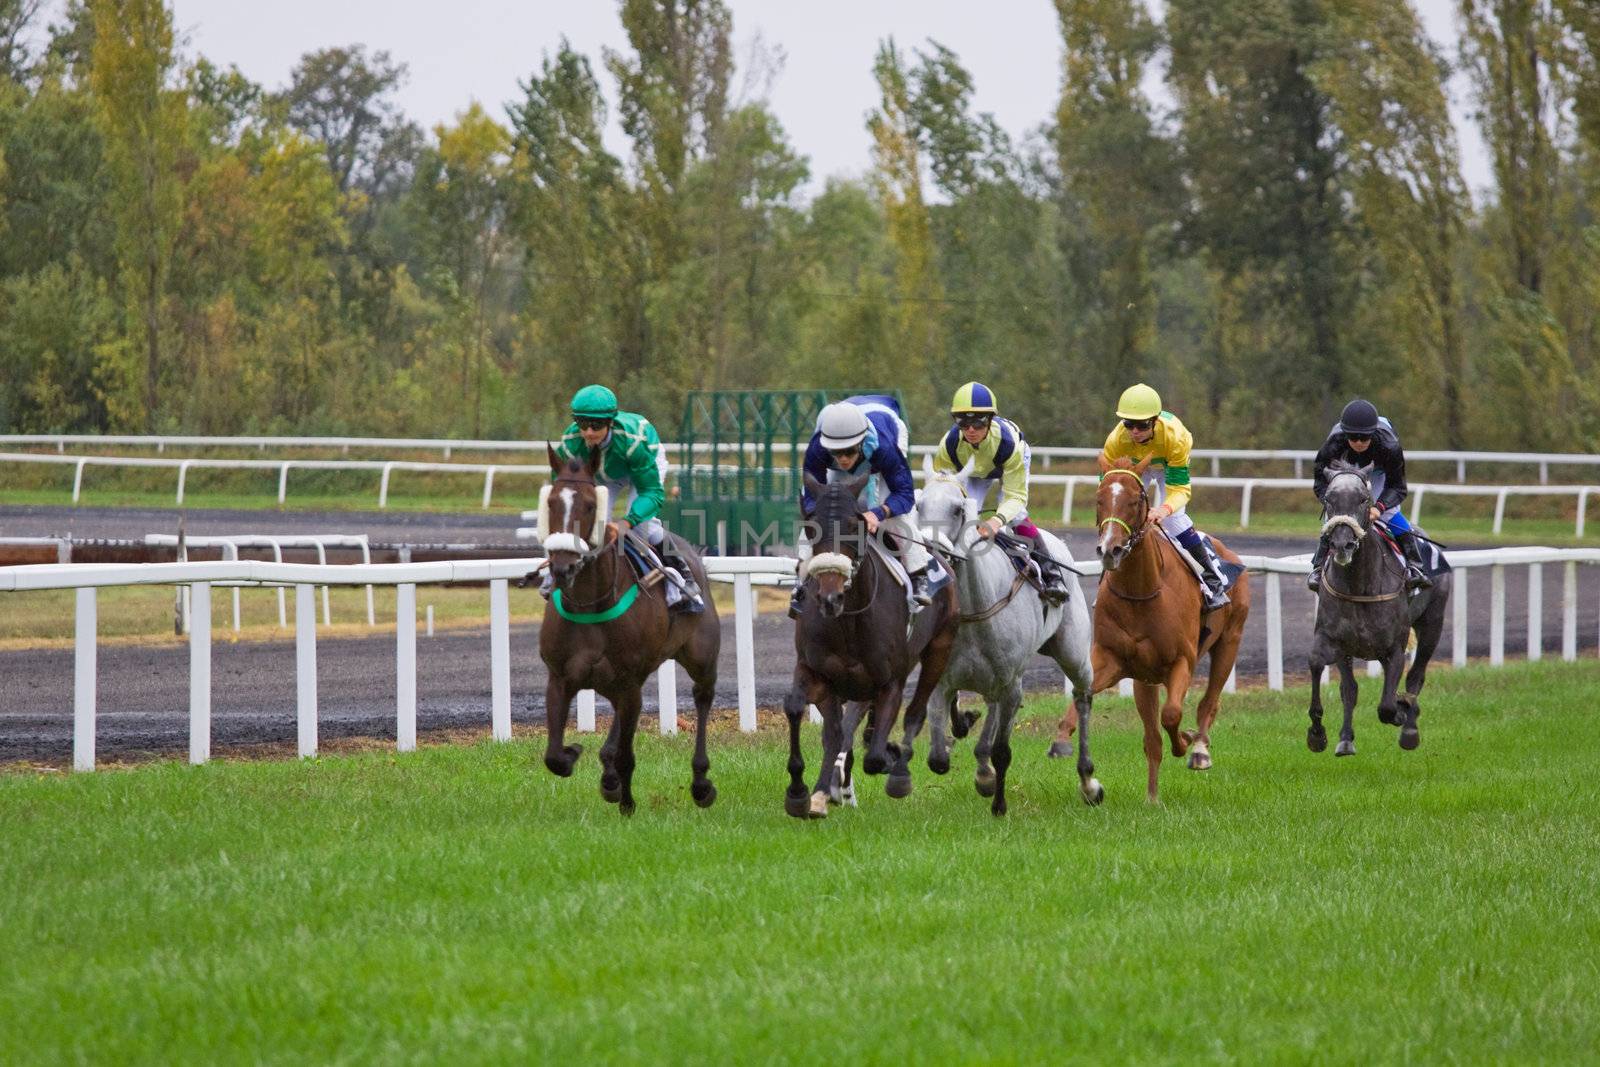 Horse Racing in France 4 by pjhpix